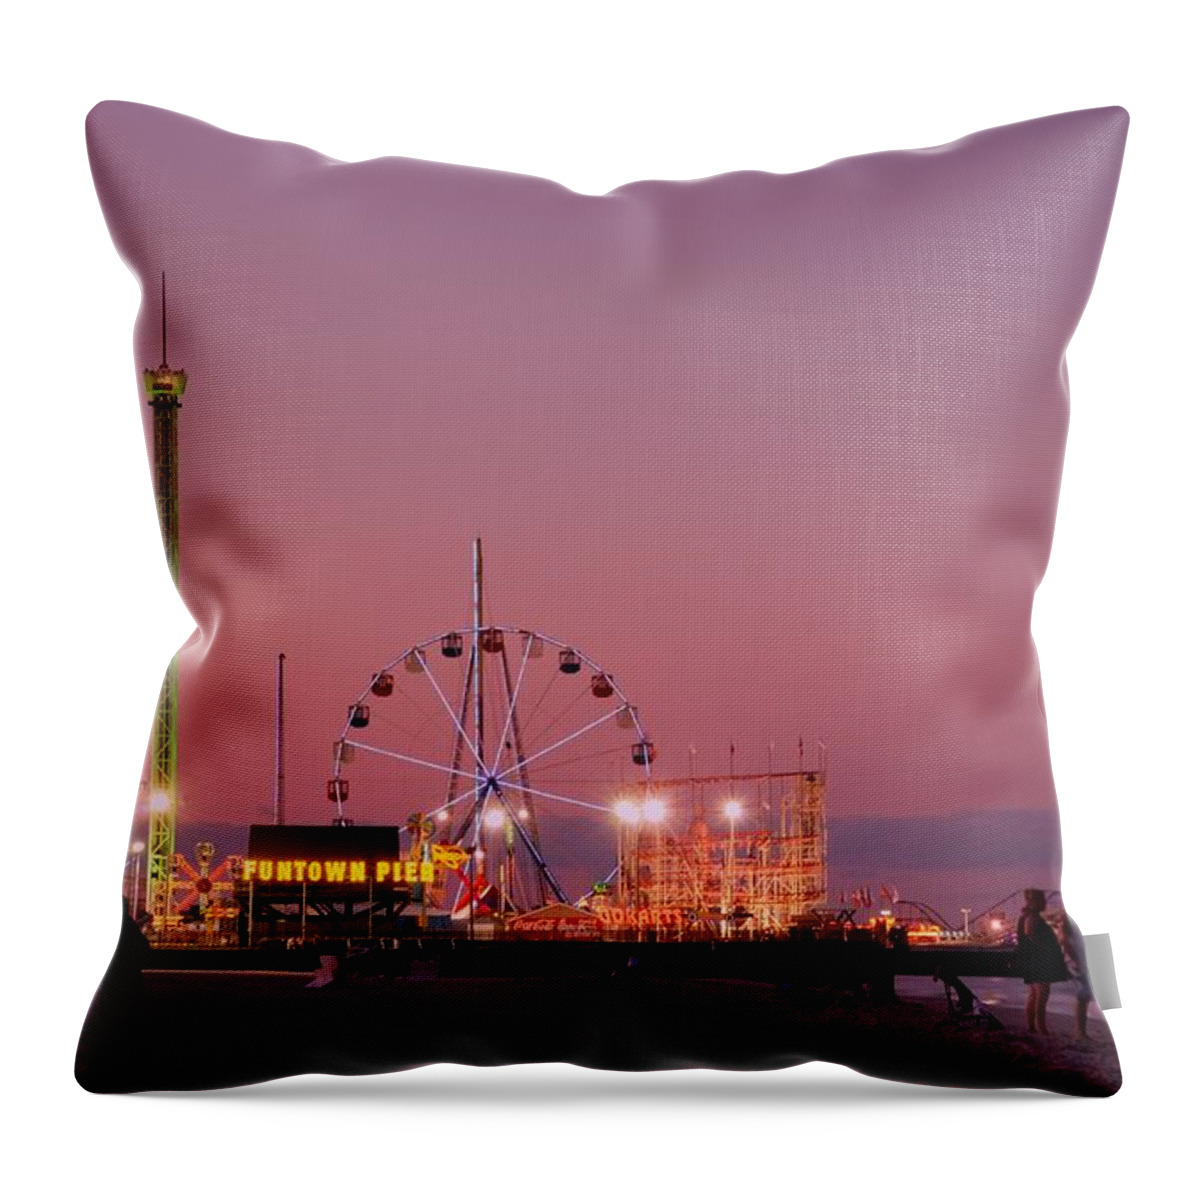 Amusement Parks Throw Pillow featuring the photograph Funtown Pier At Sunset III - Jersey Shore by Angie Tirado